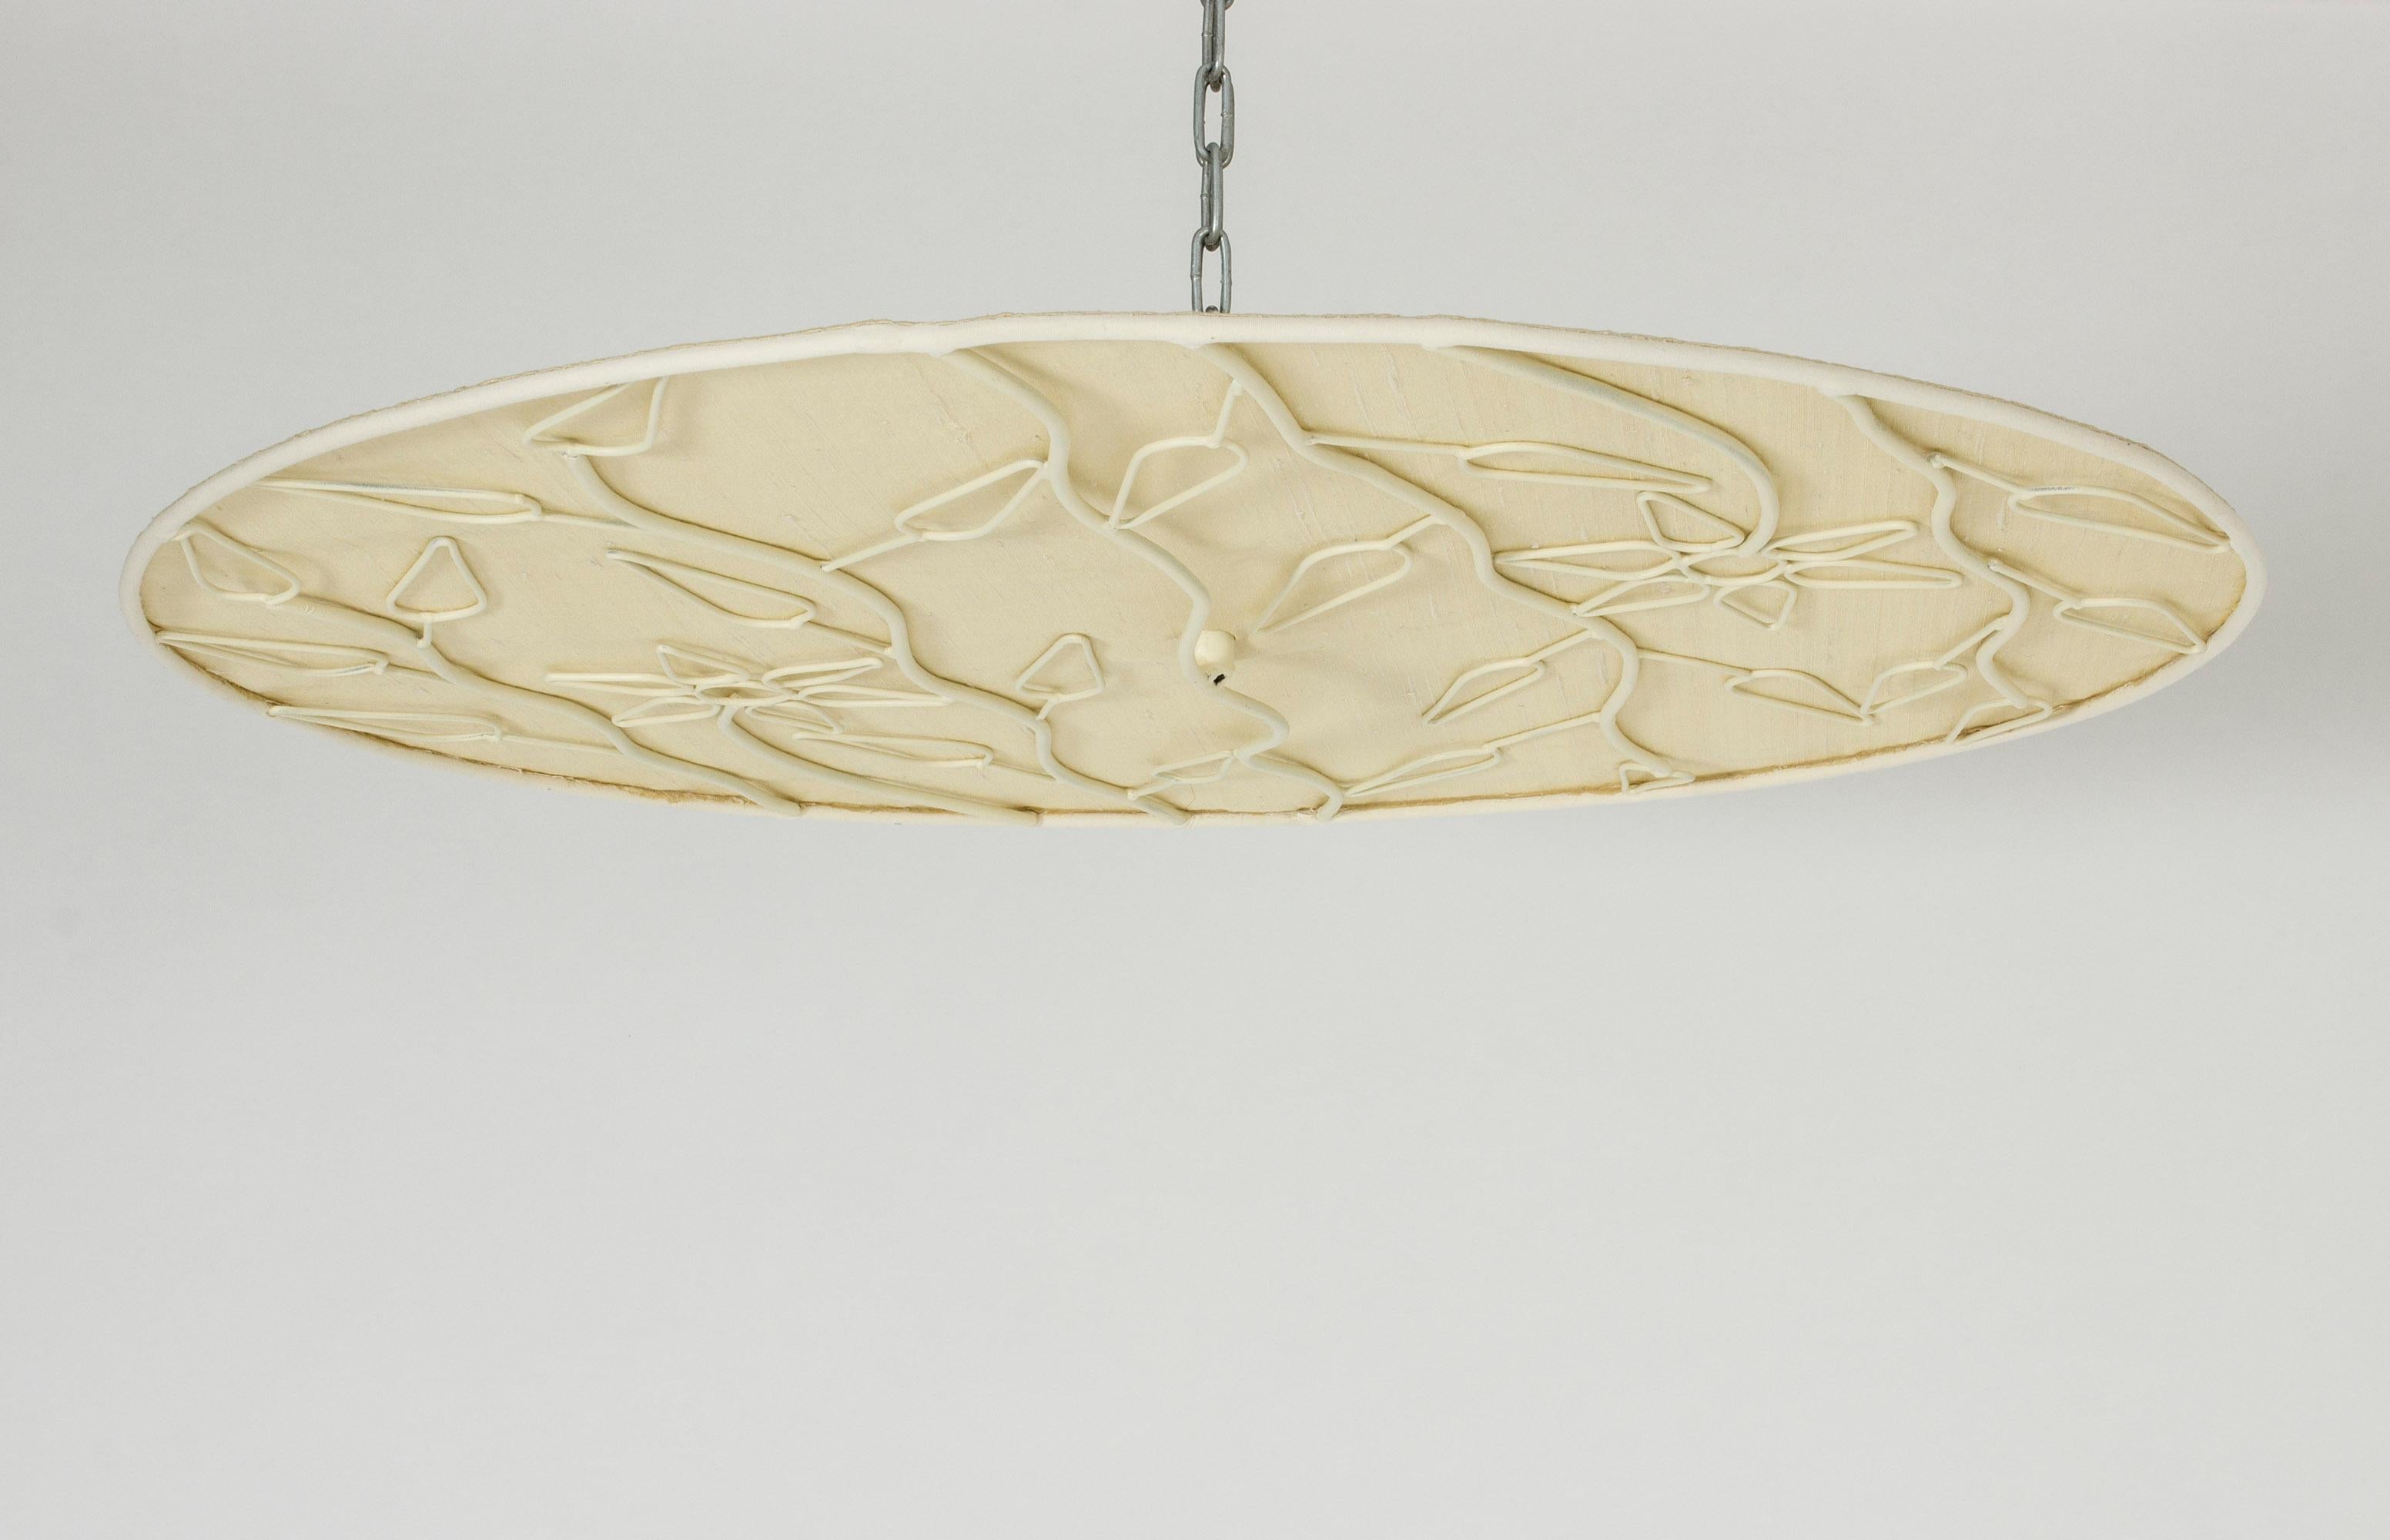 Rare and beautiful flush mount ceiling lamp by Hans Bergström. Made with a round, lacquered frame with an airy pattern of flowers and leaves creating a shadow effect against the silk fabric. Balance of poetic and elegant.